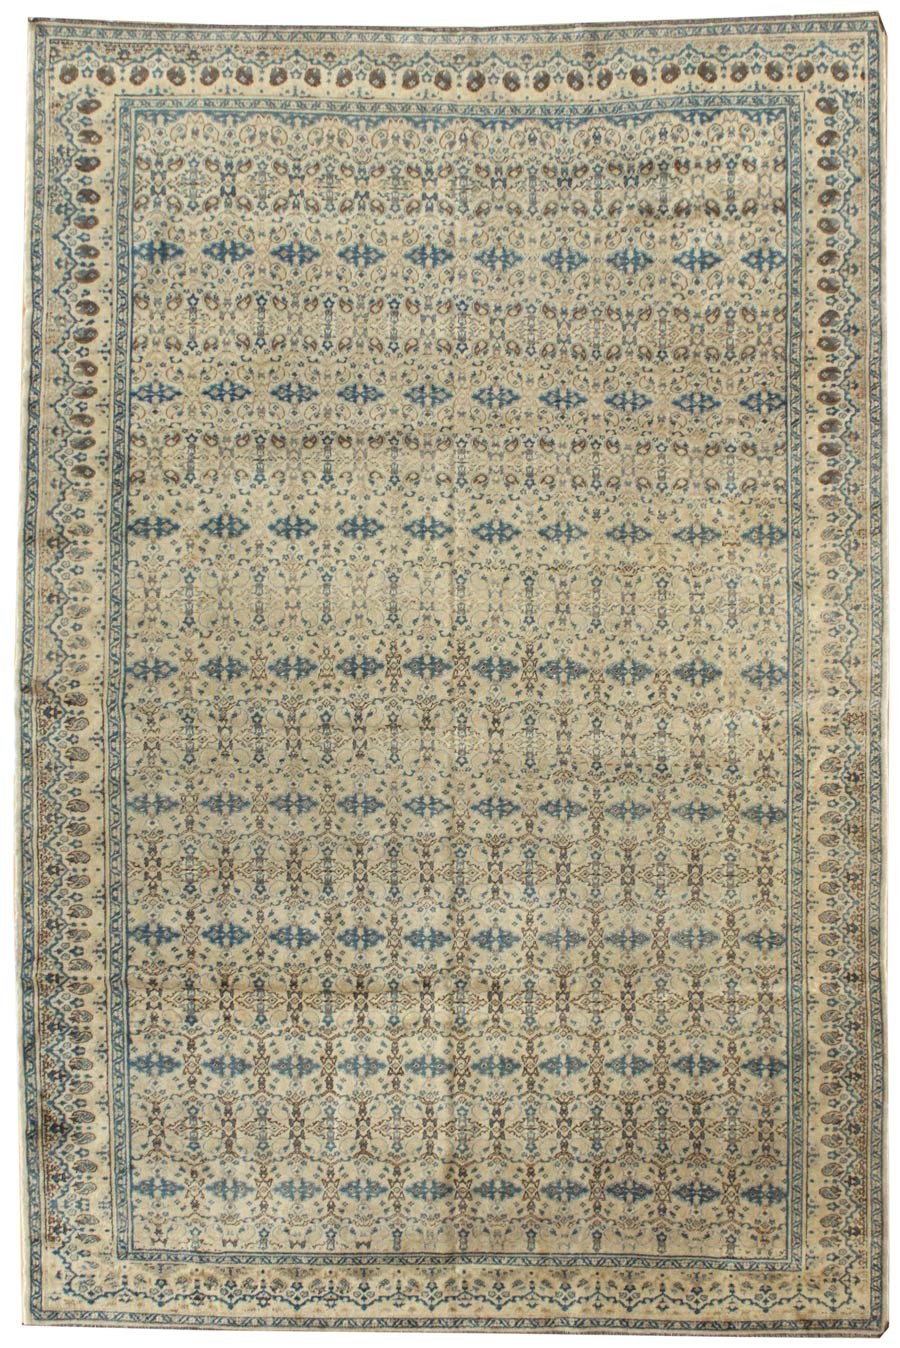 Antique Kyseri Handwoven Traditional Rug